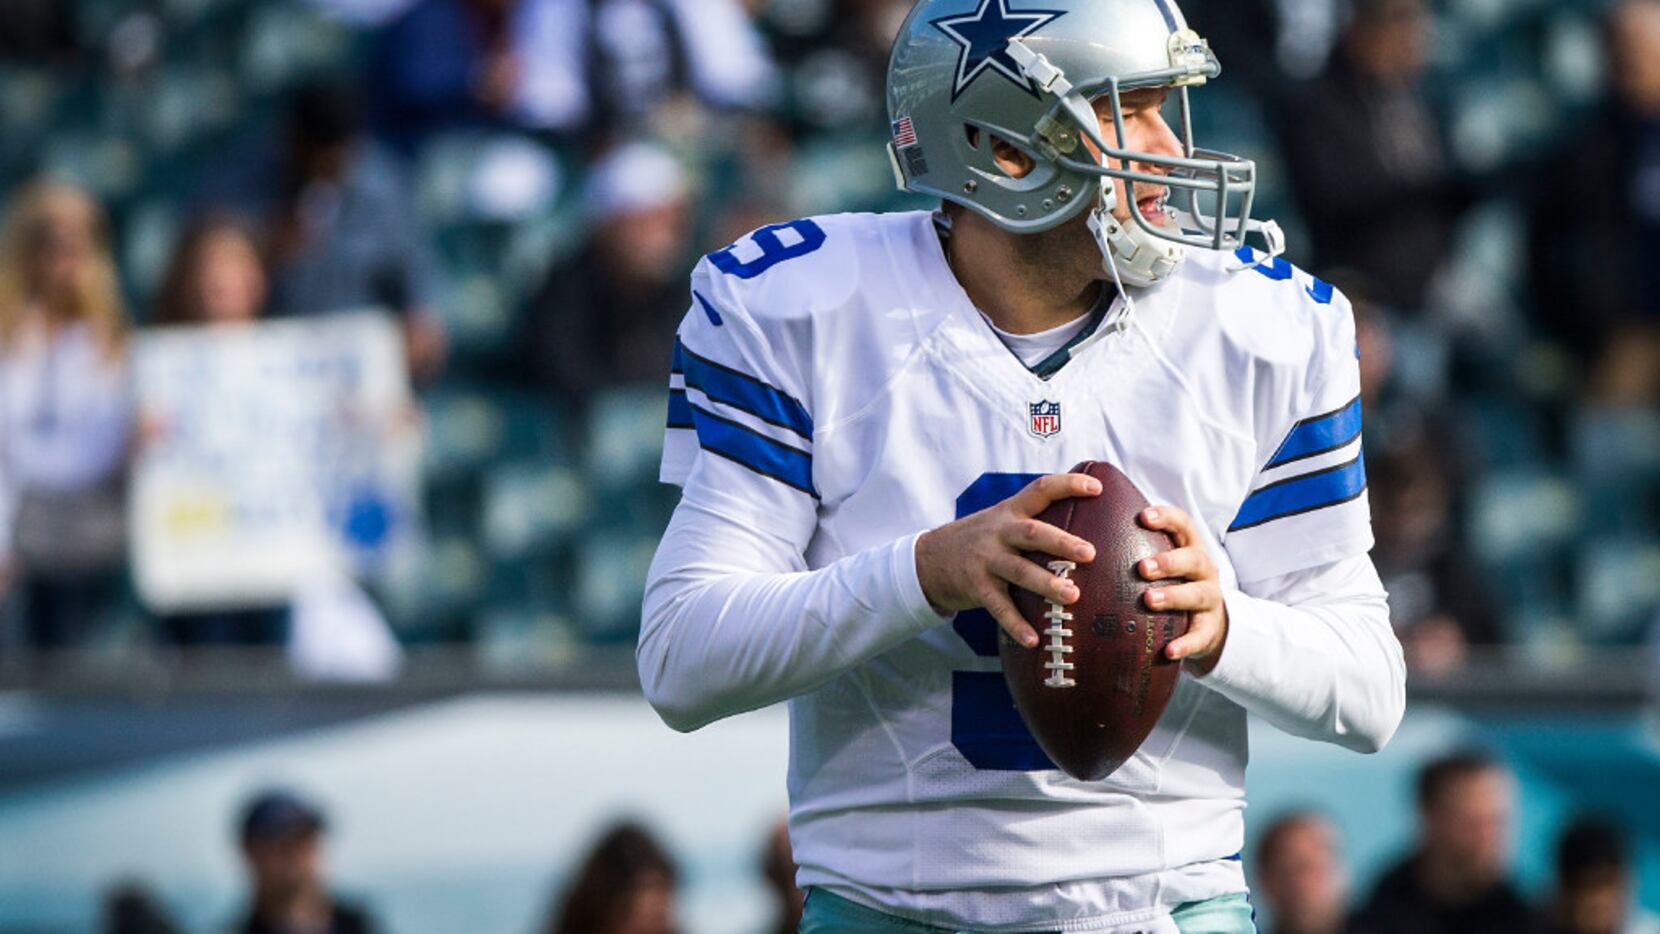 Former BYU Star Picks Off Cowboys QB During Divisional Round